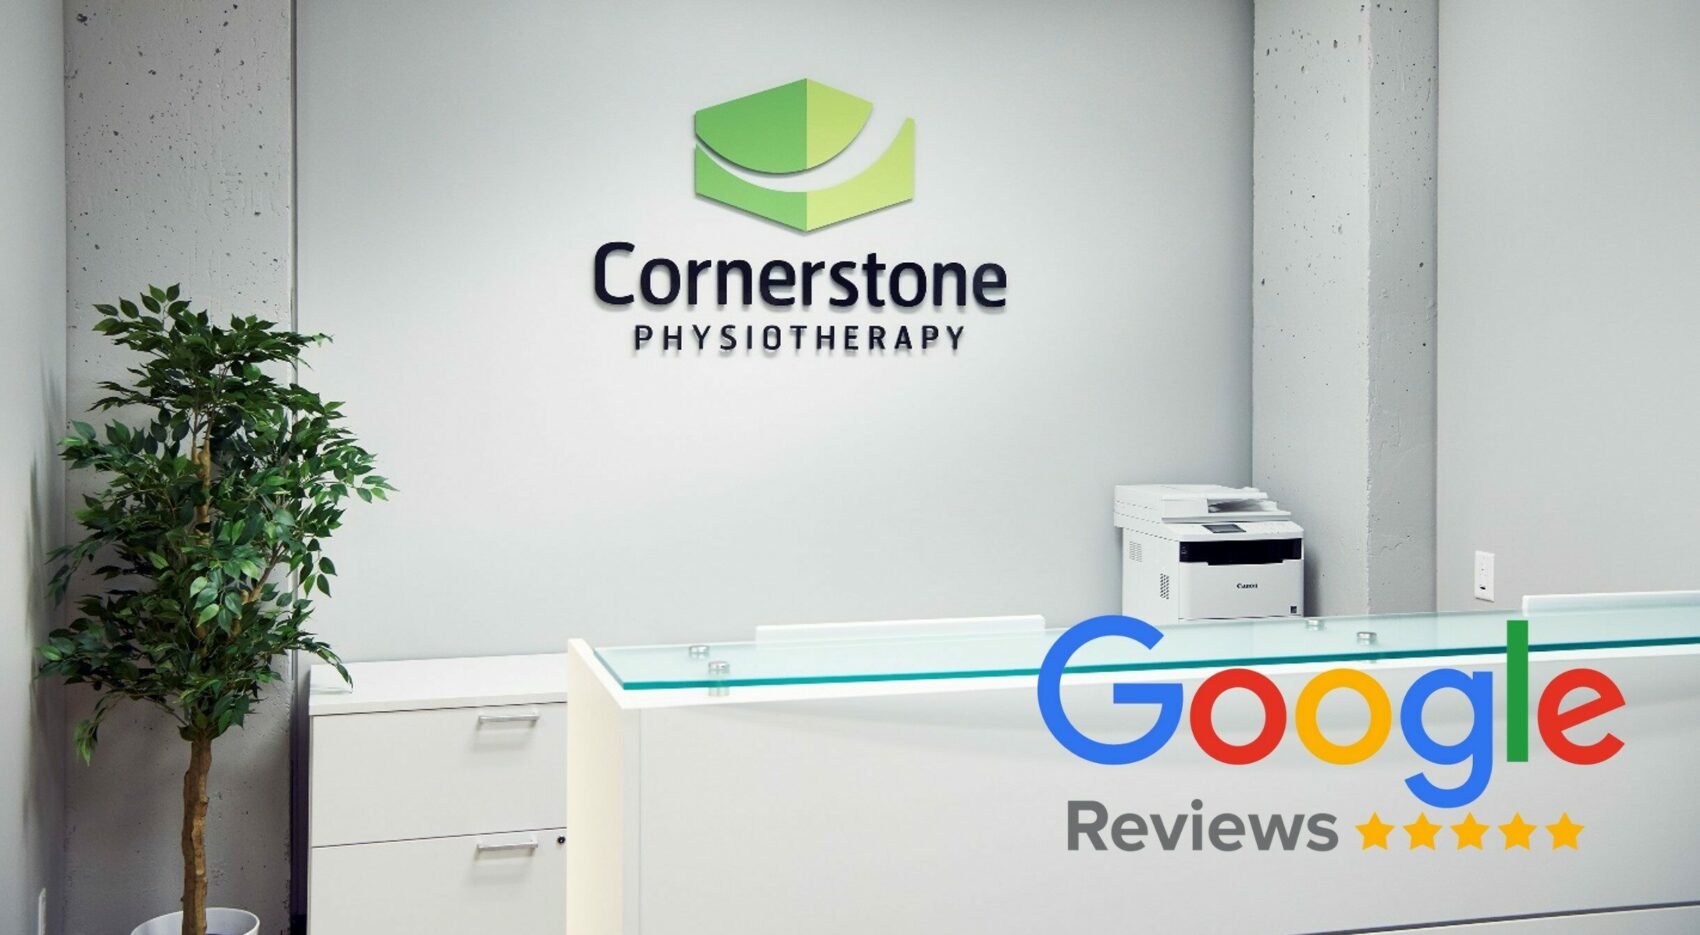 Cornerstone Physiotherapy Clinic showing Google 5-star rating